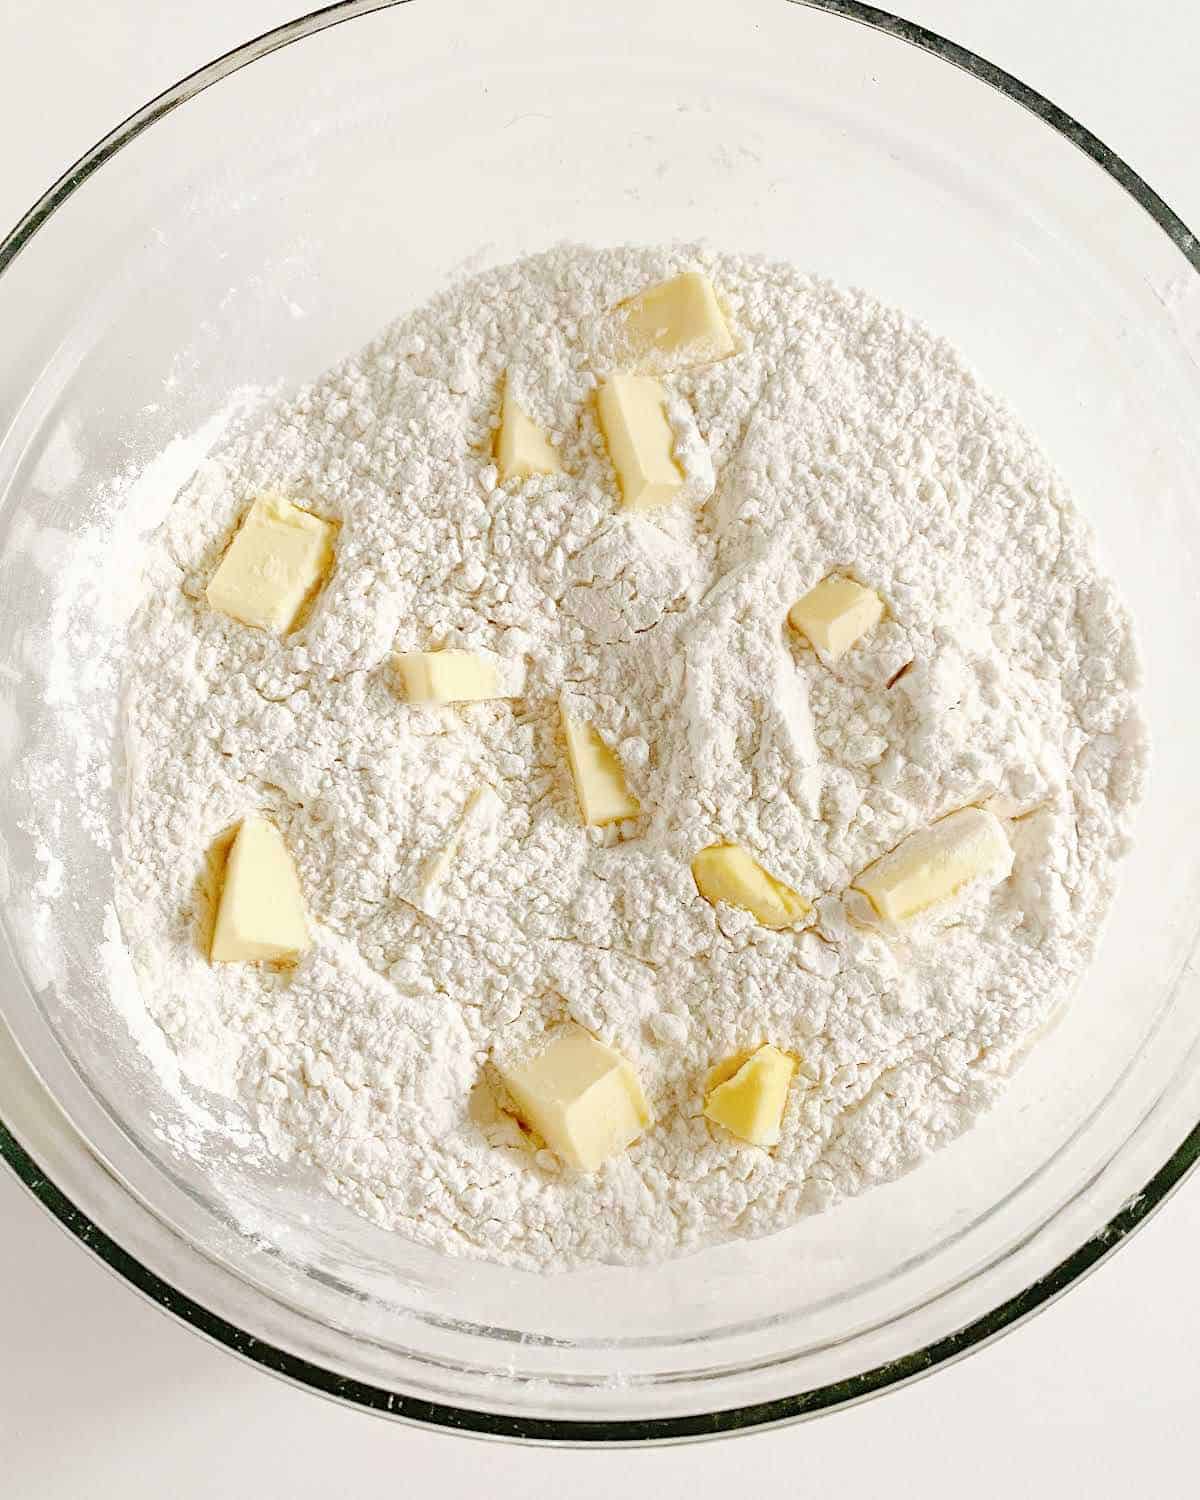 Butter pieces added to flour mixture in a glass bowl on a white surface. 